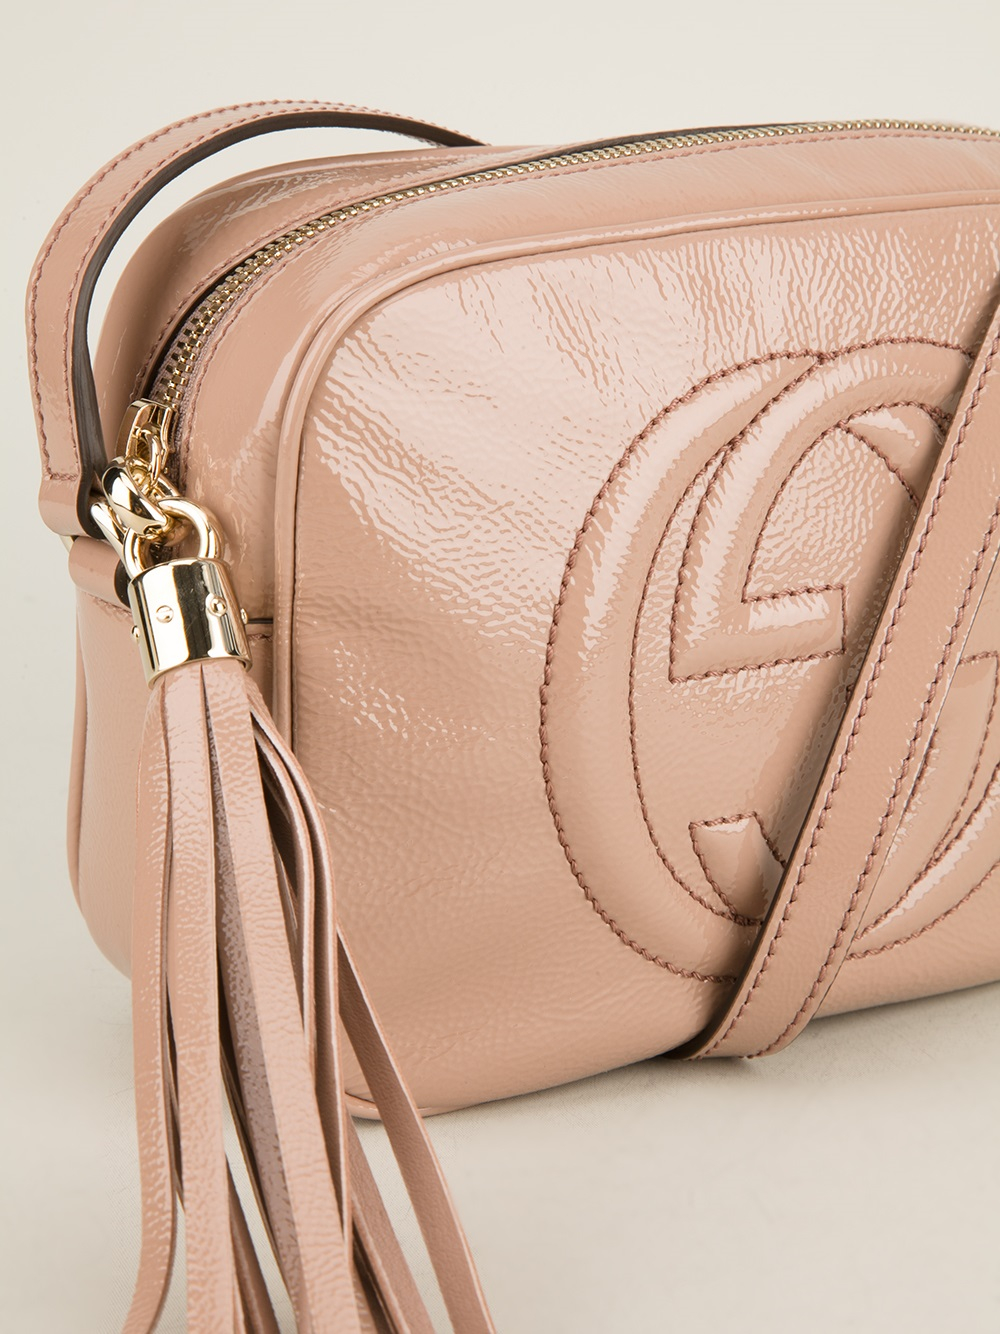 Gucci Soho Disco Crossbody in Nude - More Than You Can Imagine